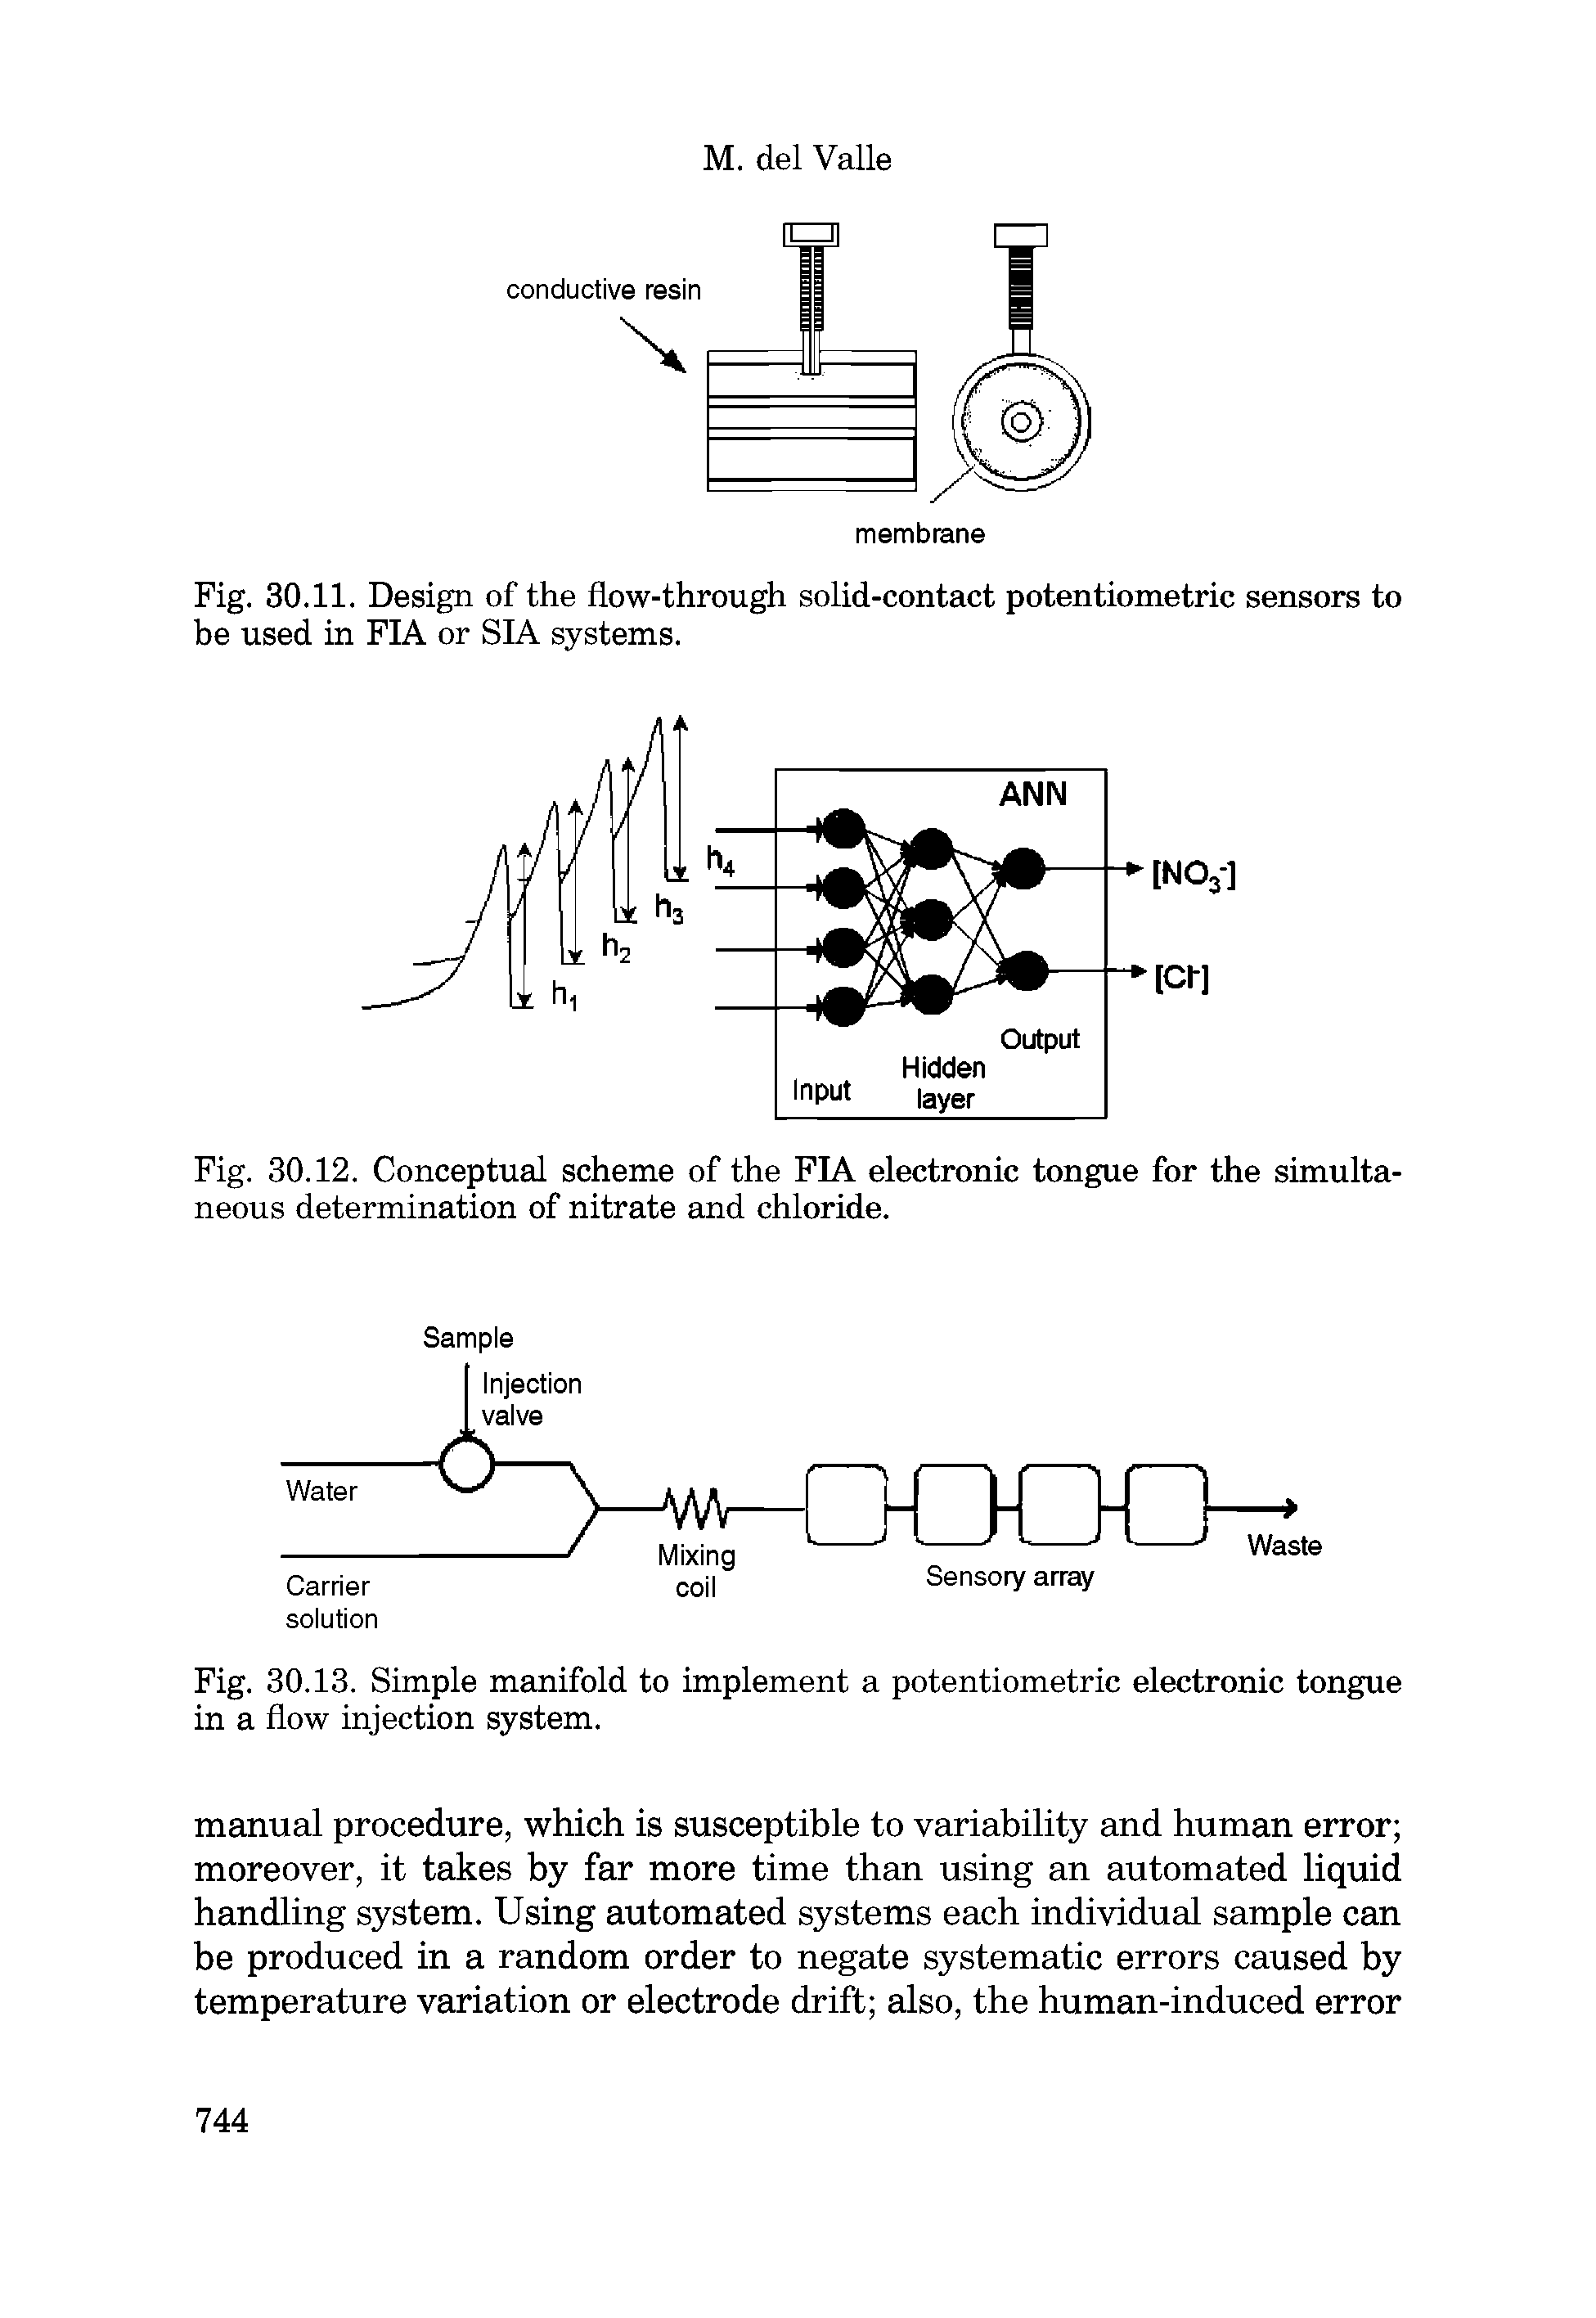 Fig. 30.12. Conceptual scheme of the FIA electronic tongue for the simultaneous determination of nitrate and chloride.